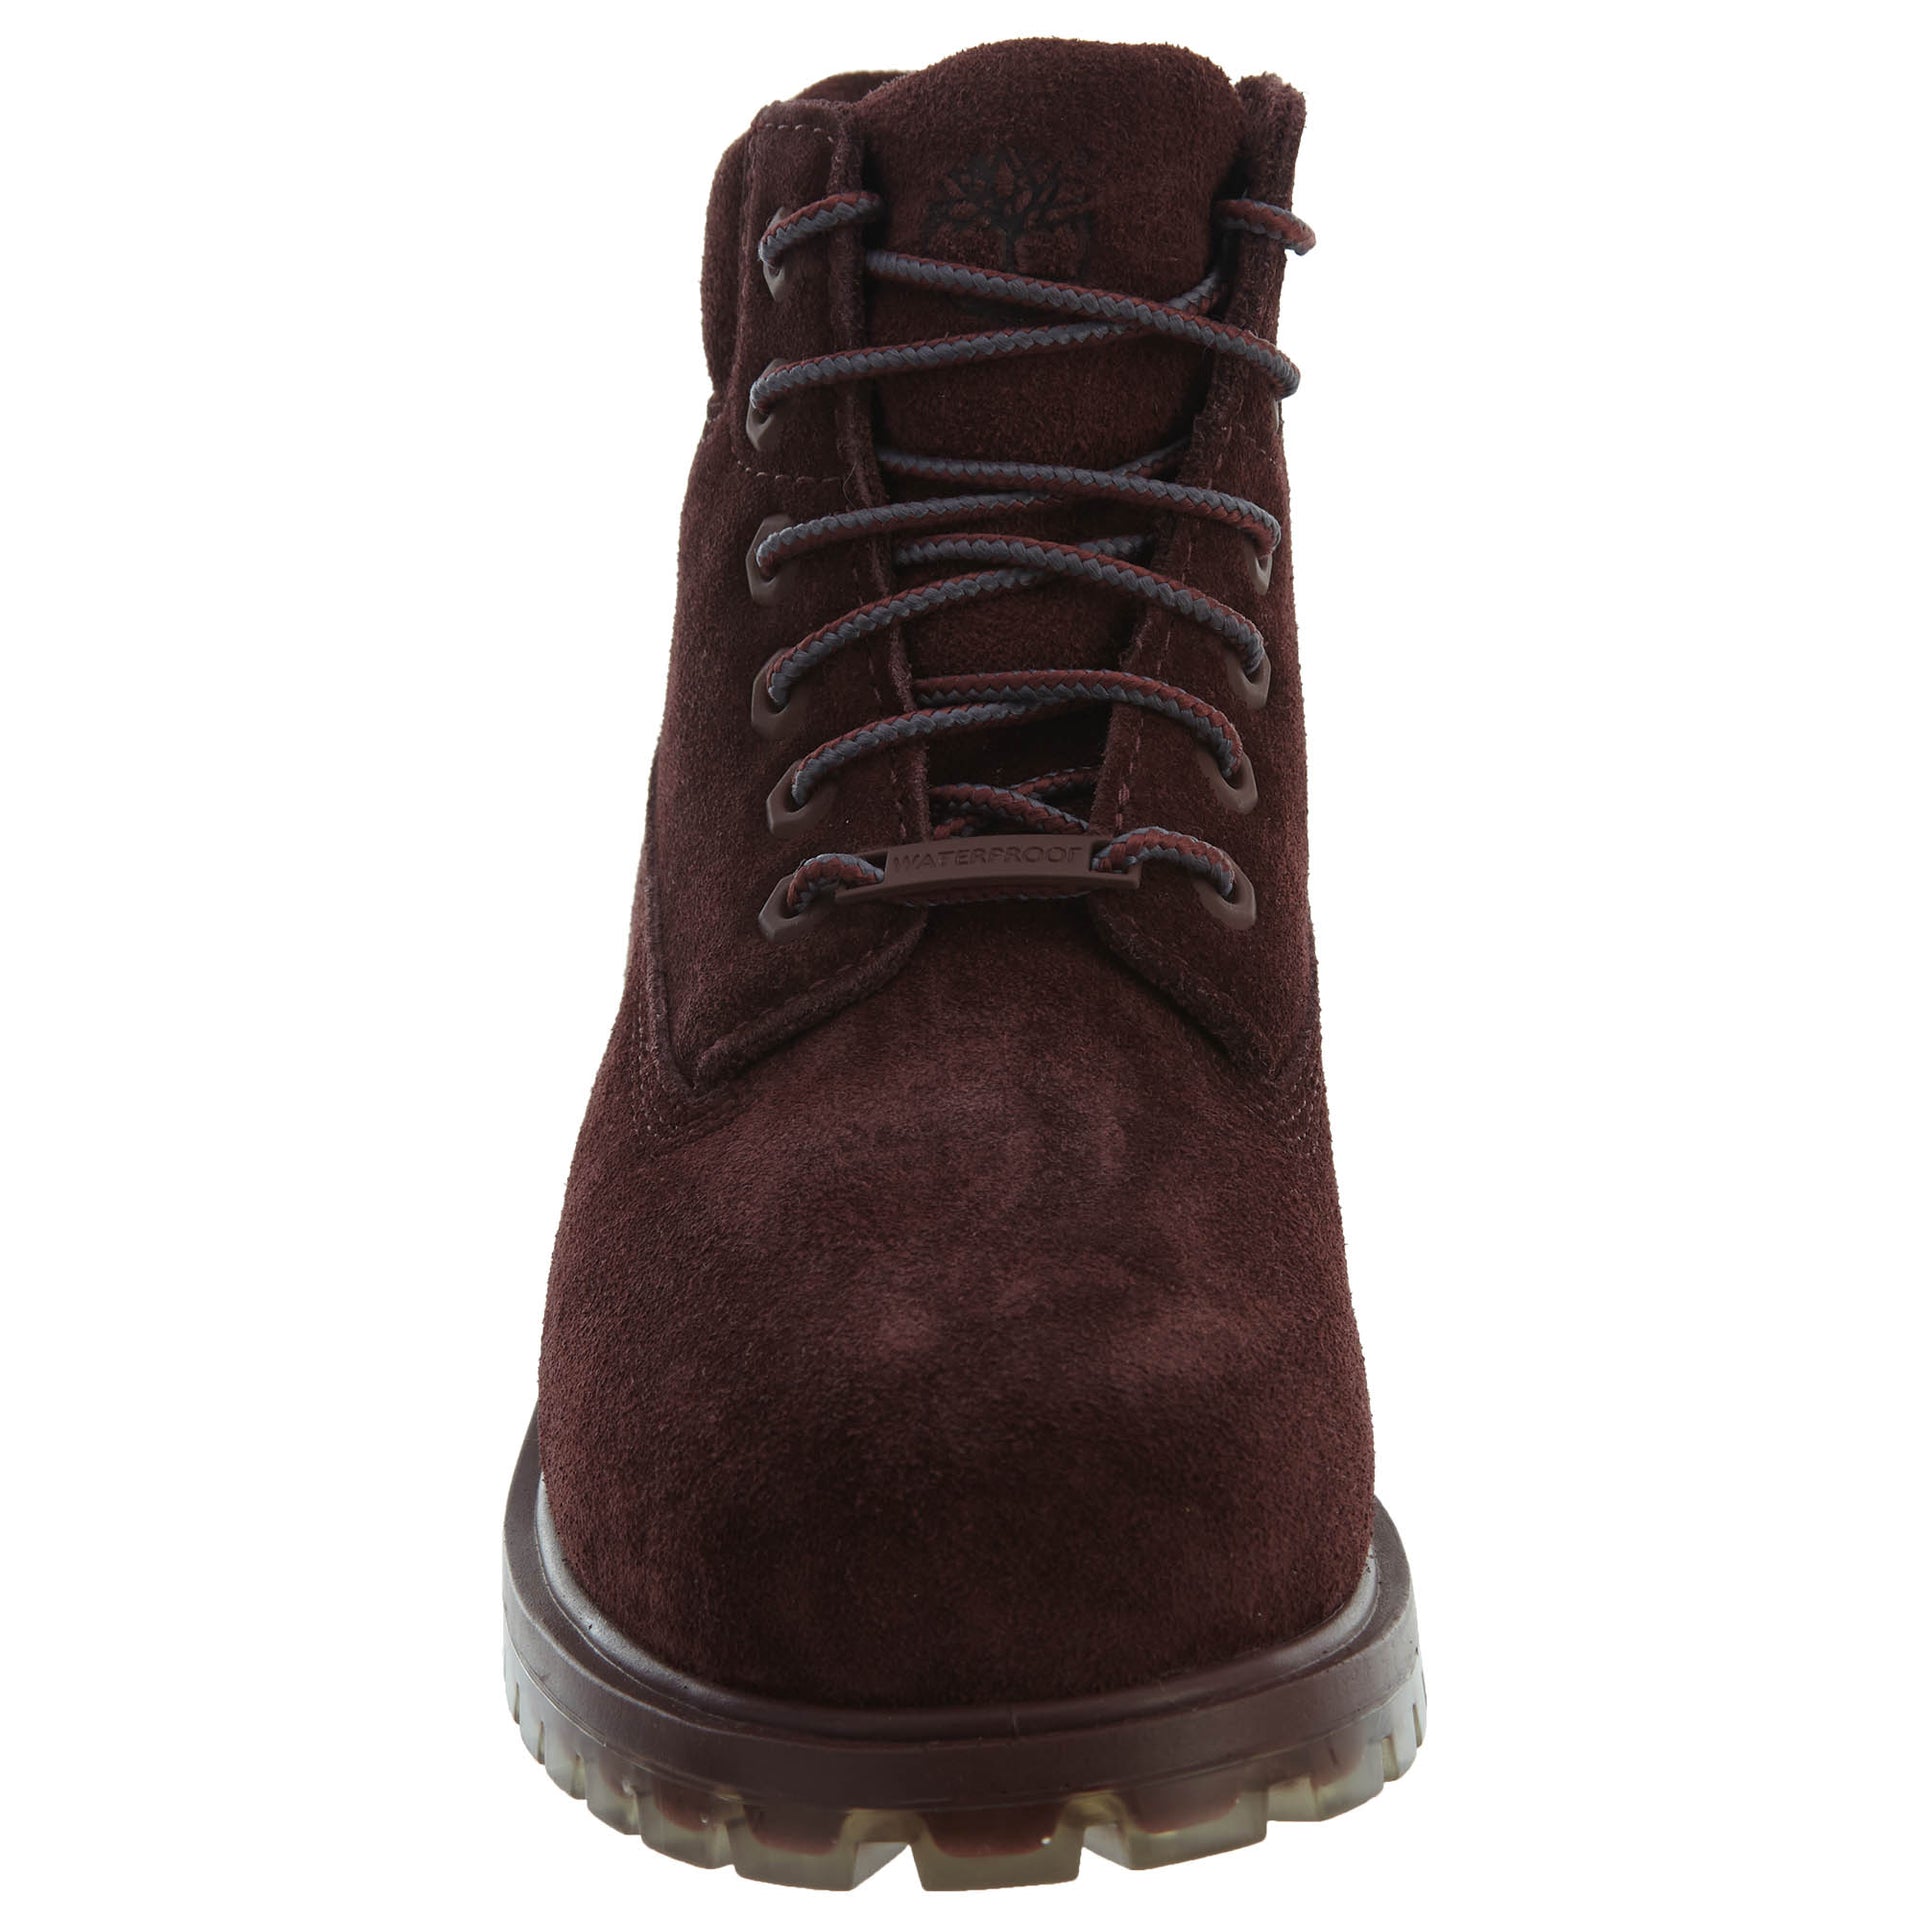 Timberland 6" Tpu Outsole Waterproof Suede Big Kids Style : Tb0a1ahq